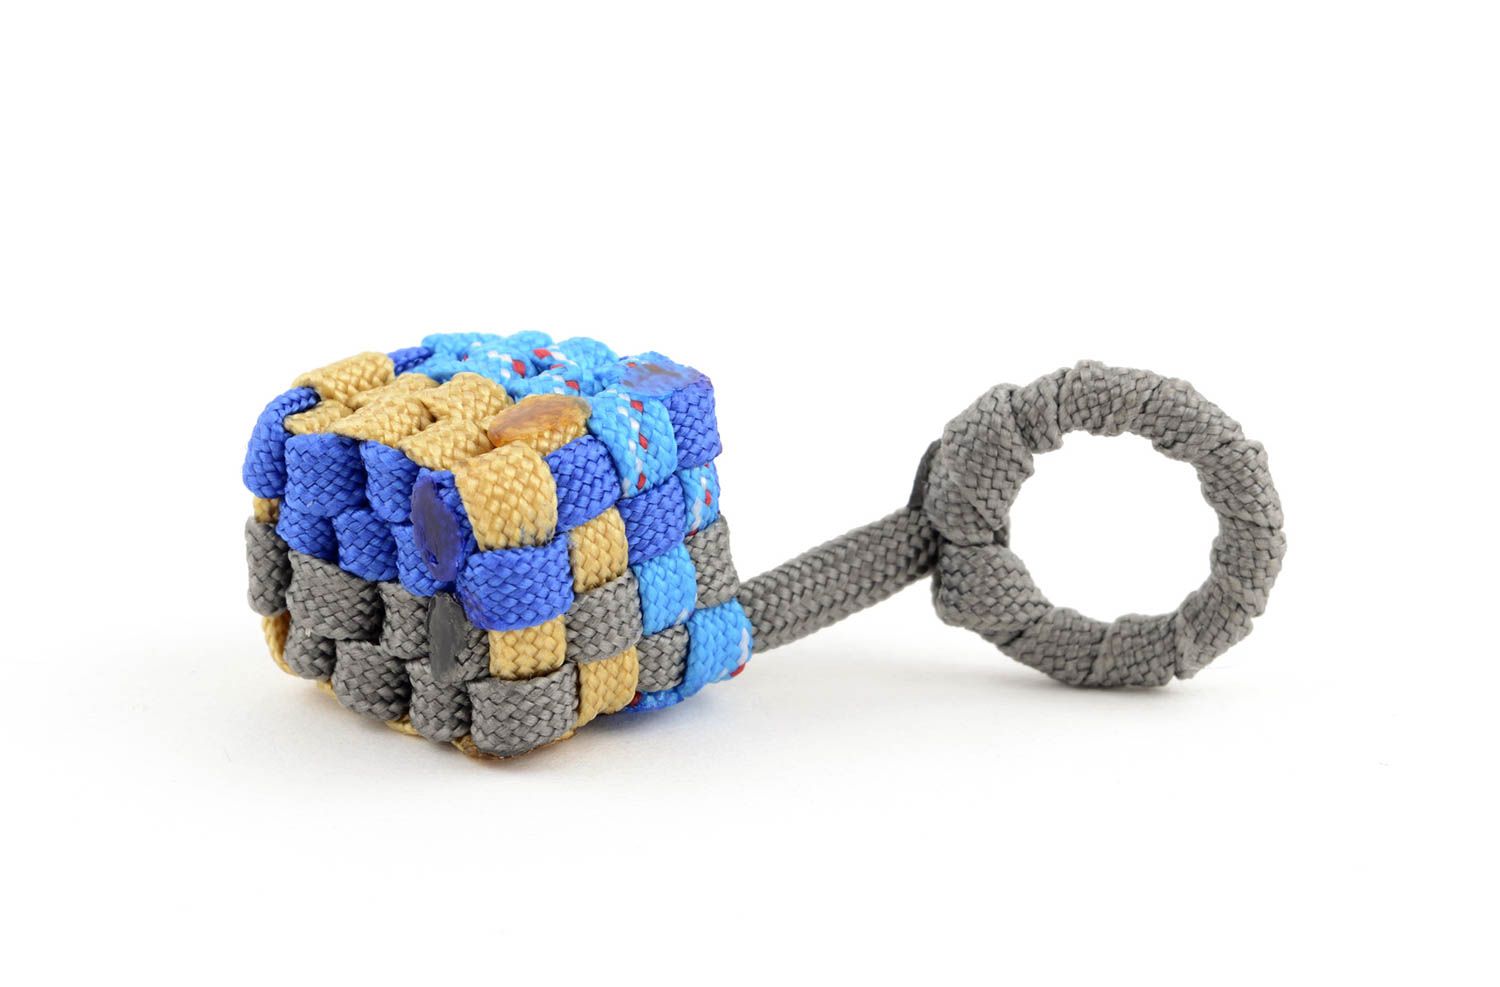 Handmade paracord key fob key accessories cool gifts hiking equipment photo 3